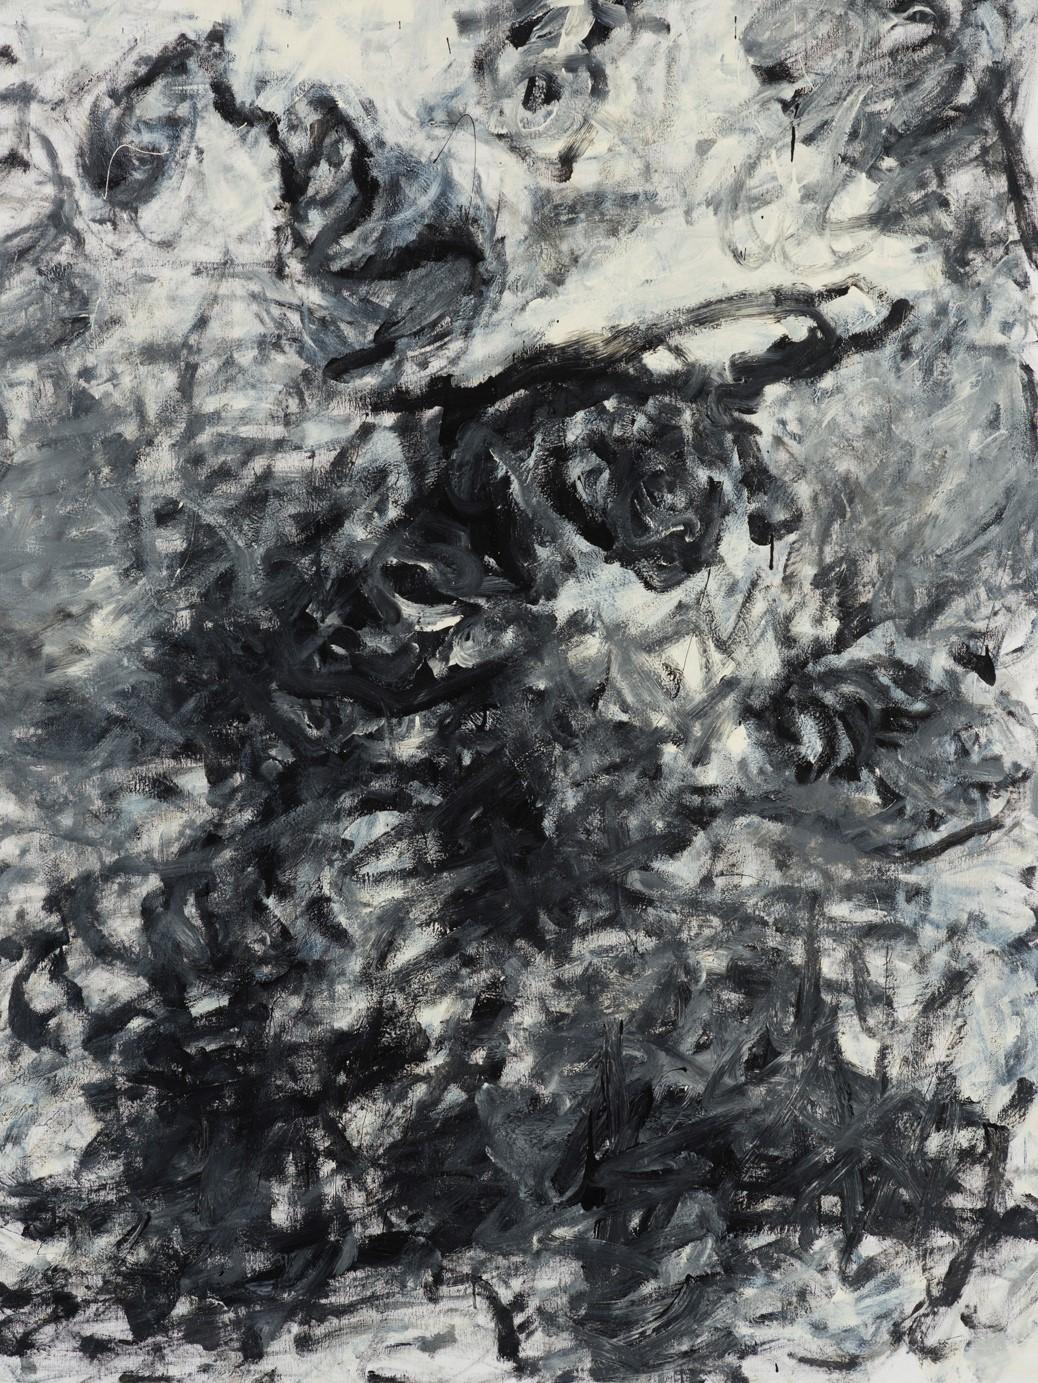 Untitled 04 [Remains of the Remains 04] - 21st Century, Abstract, Black, Grey - Painting by Zsolt Berszán